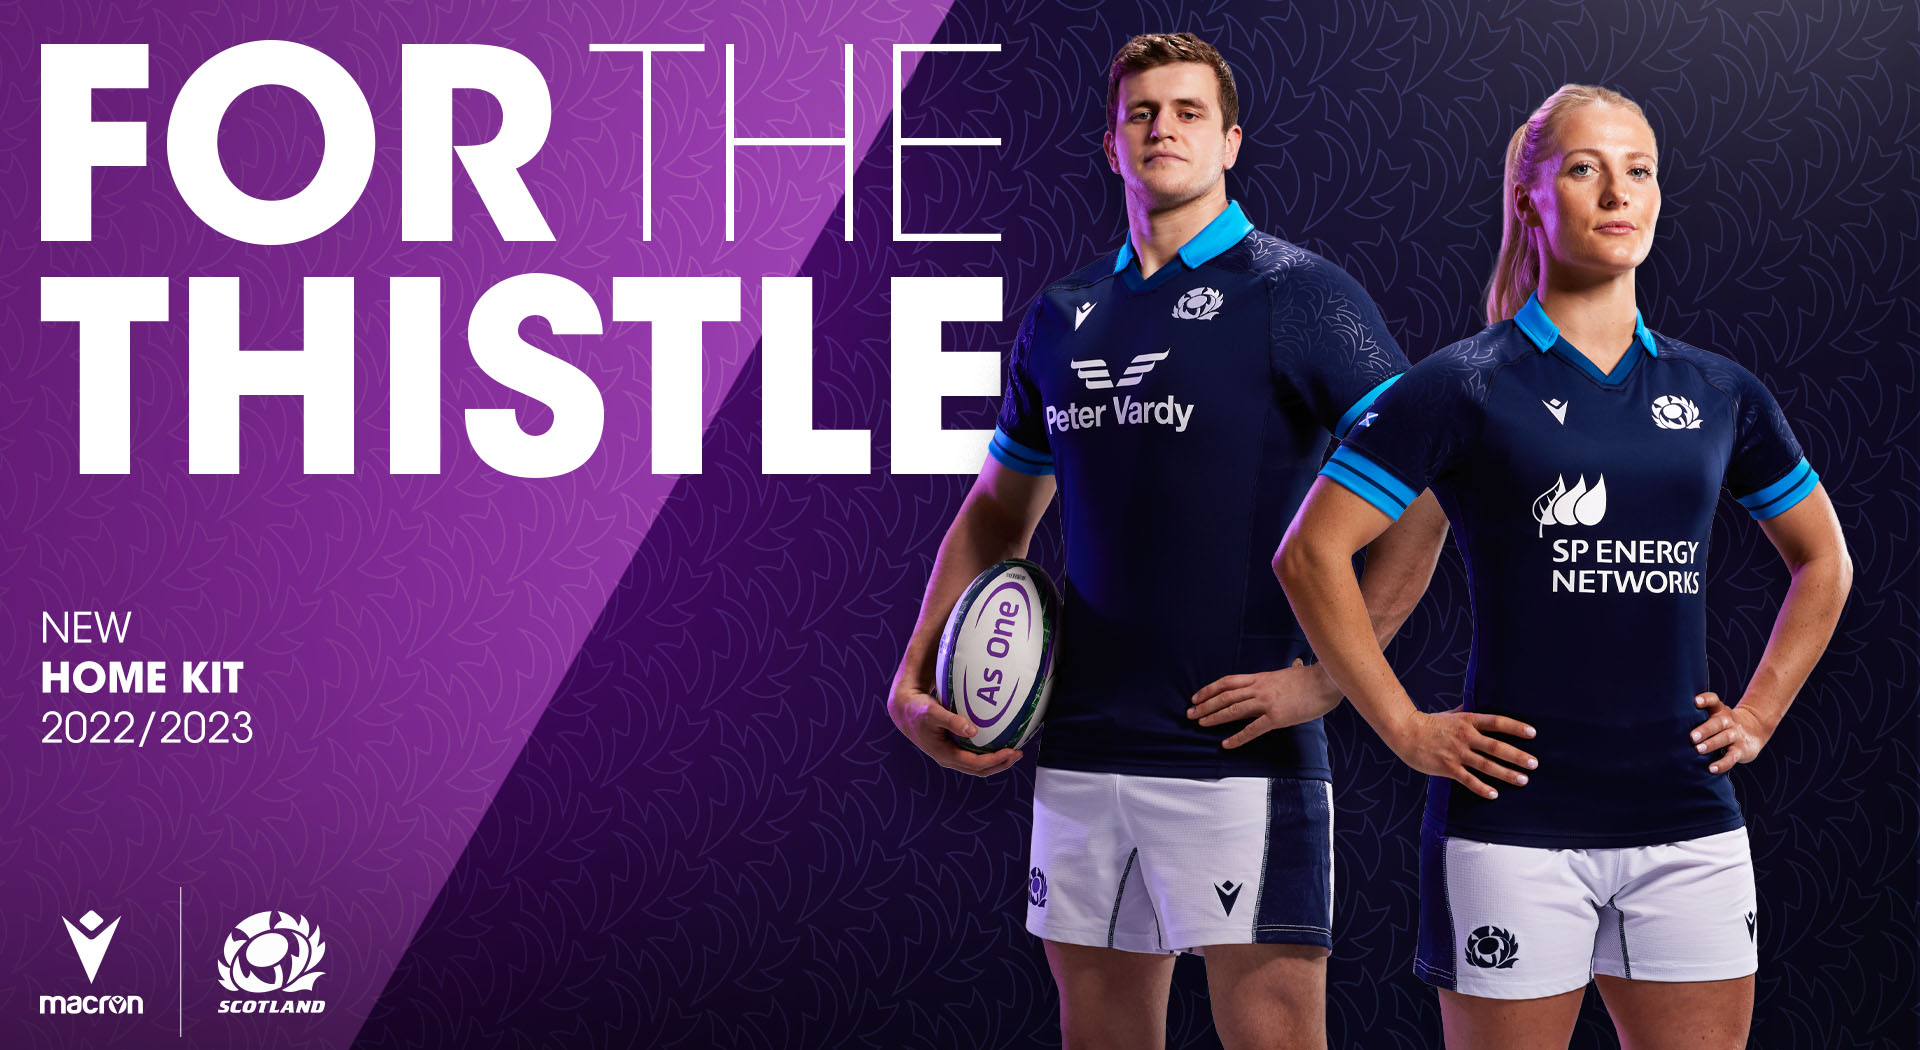 Thistle is sharp on Scotland's new eco-fabric home kits